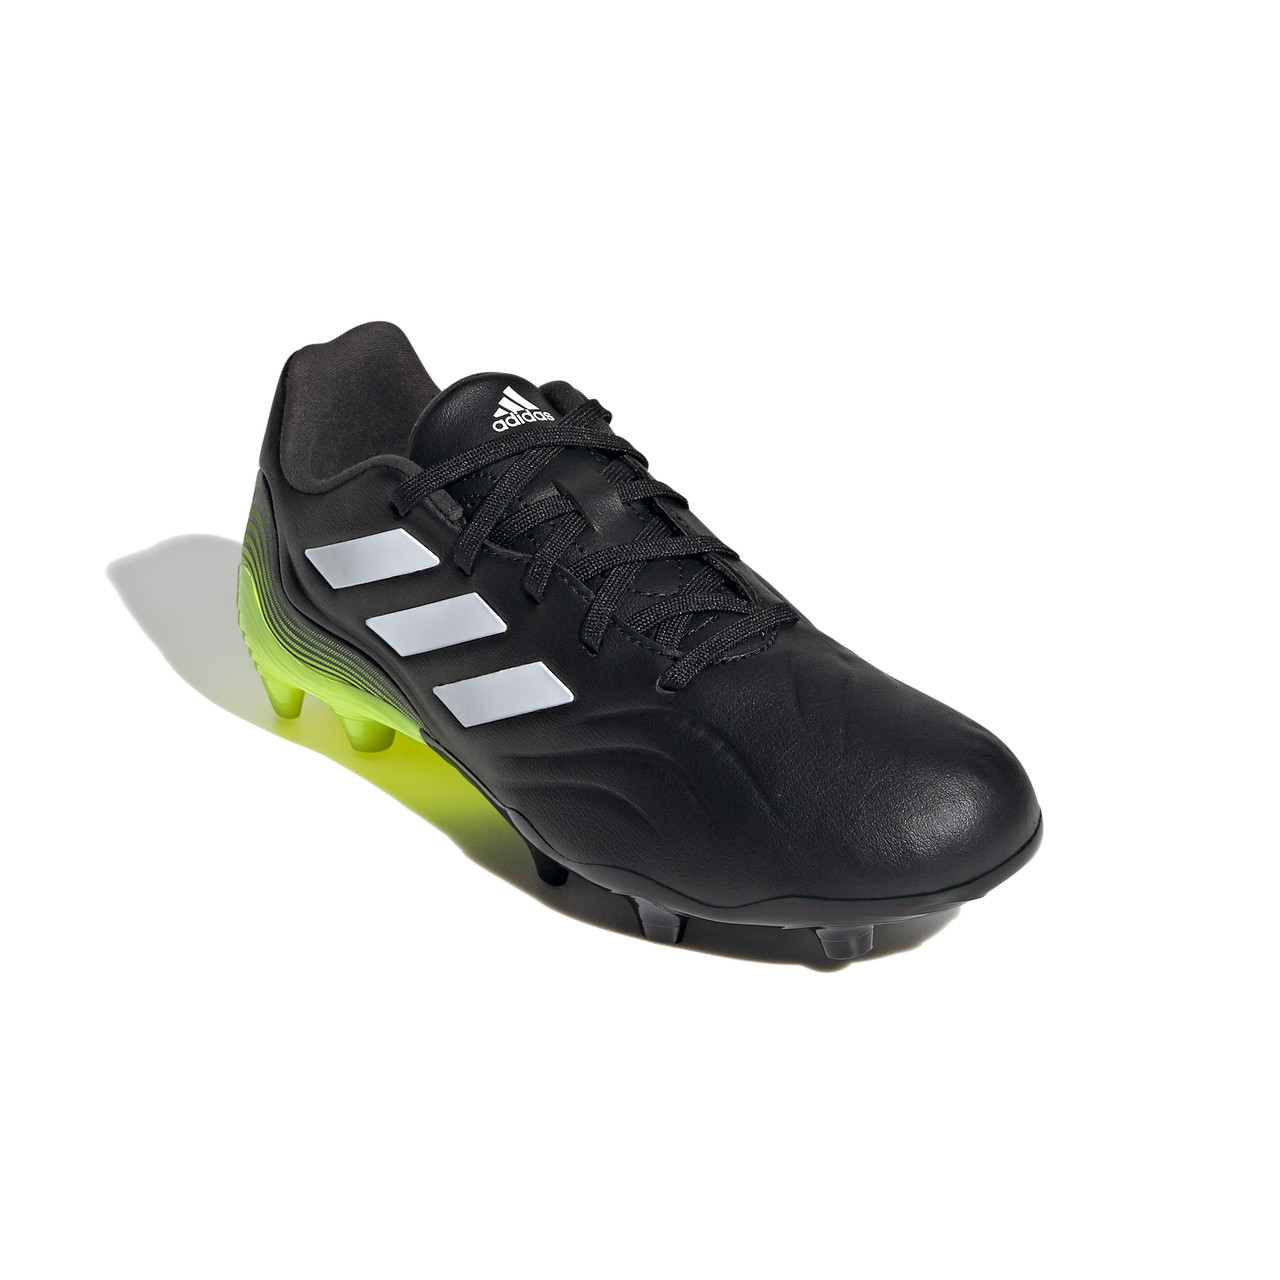 adidas Copa Sense.3 Firm Ground Cleats Youth Version Black/White Chicago Soccer